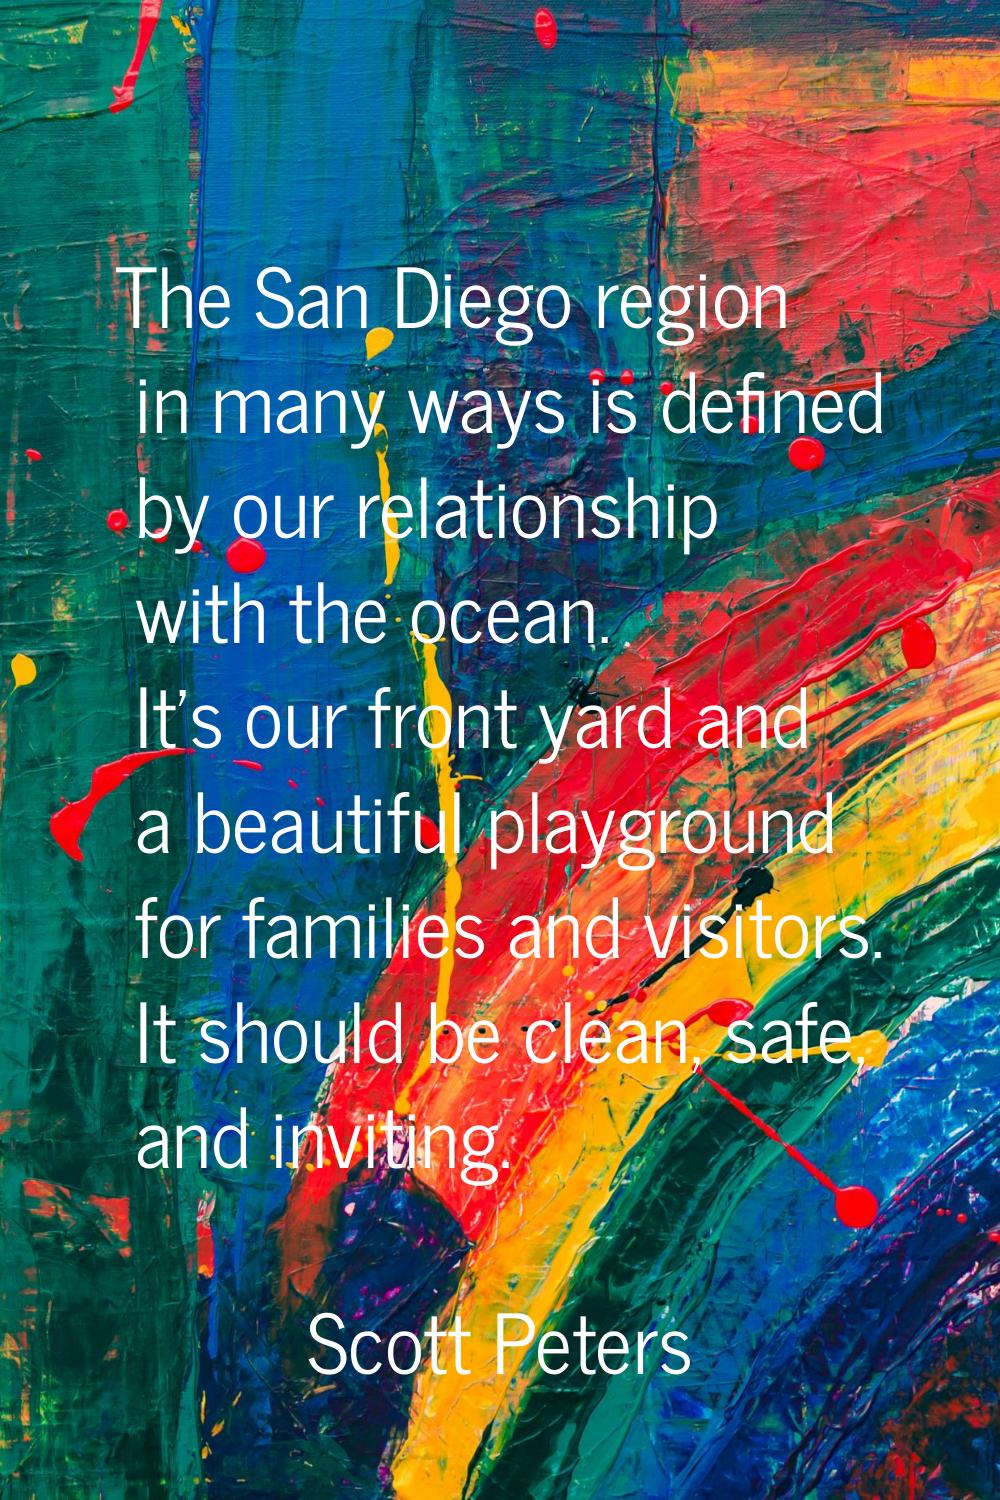 The San Diego region in many ways is defined by our relationship with the ocean. It's our front yar